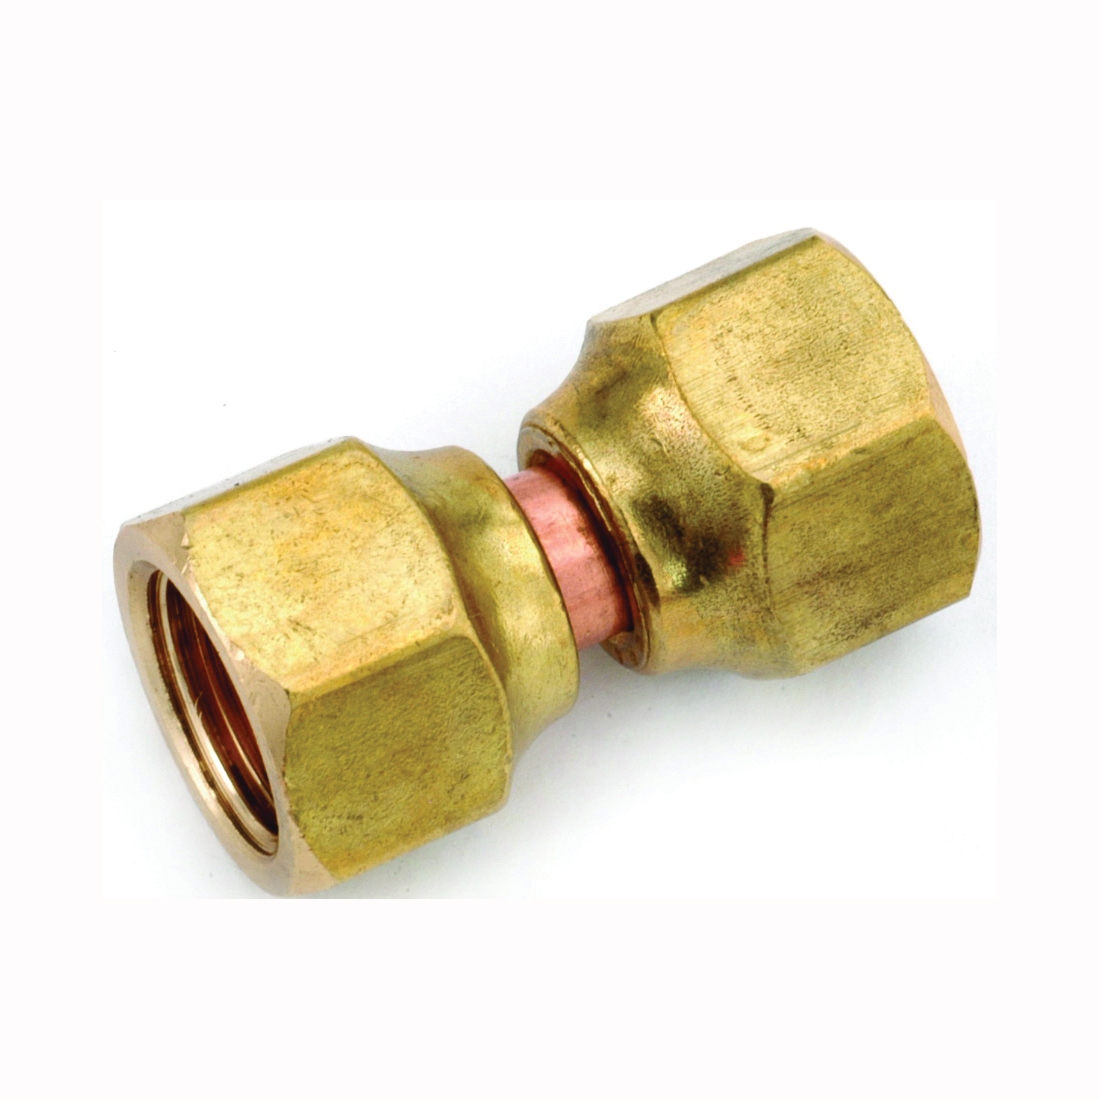 1 Each Brass Flare Union 754042-10 Anderson Metals 5/8 In 